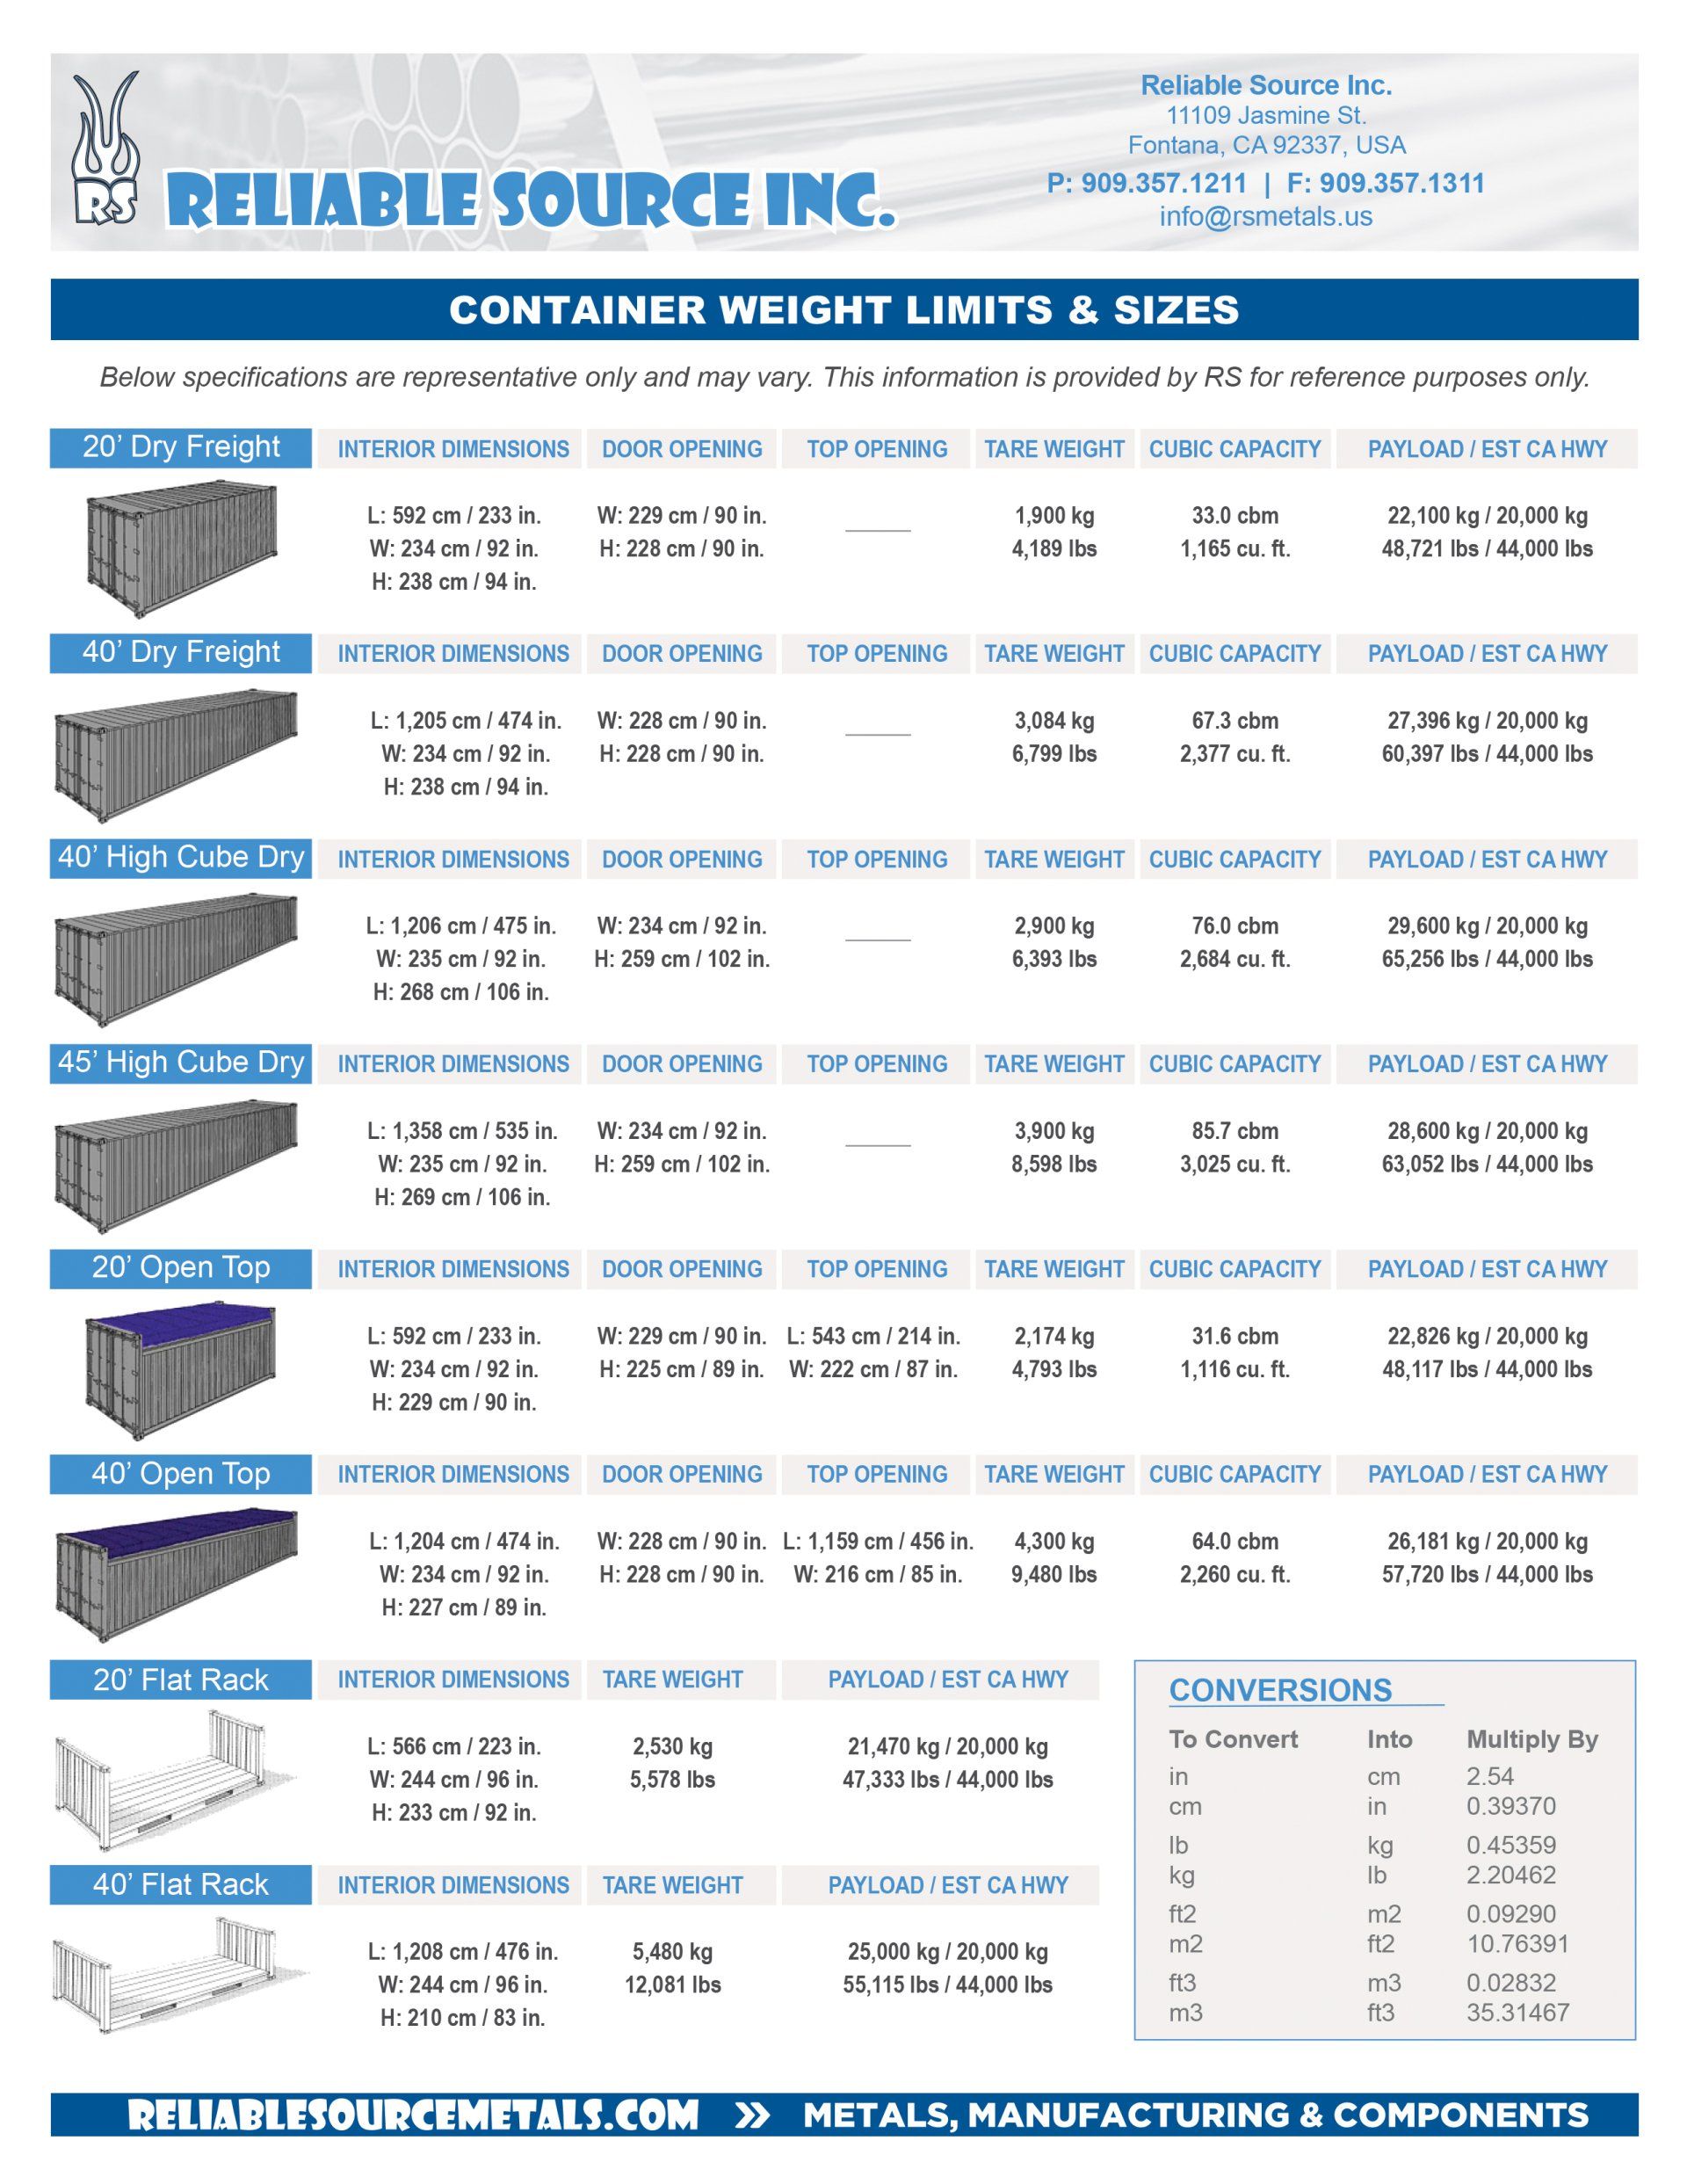 Container Weight Limits and Sizes